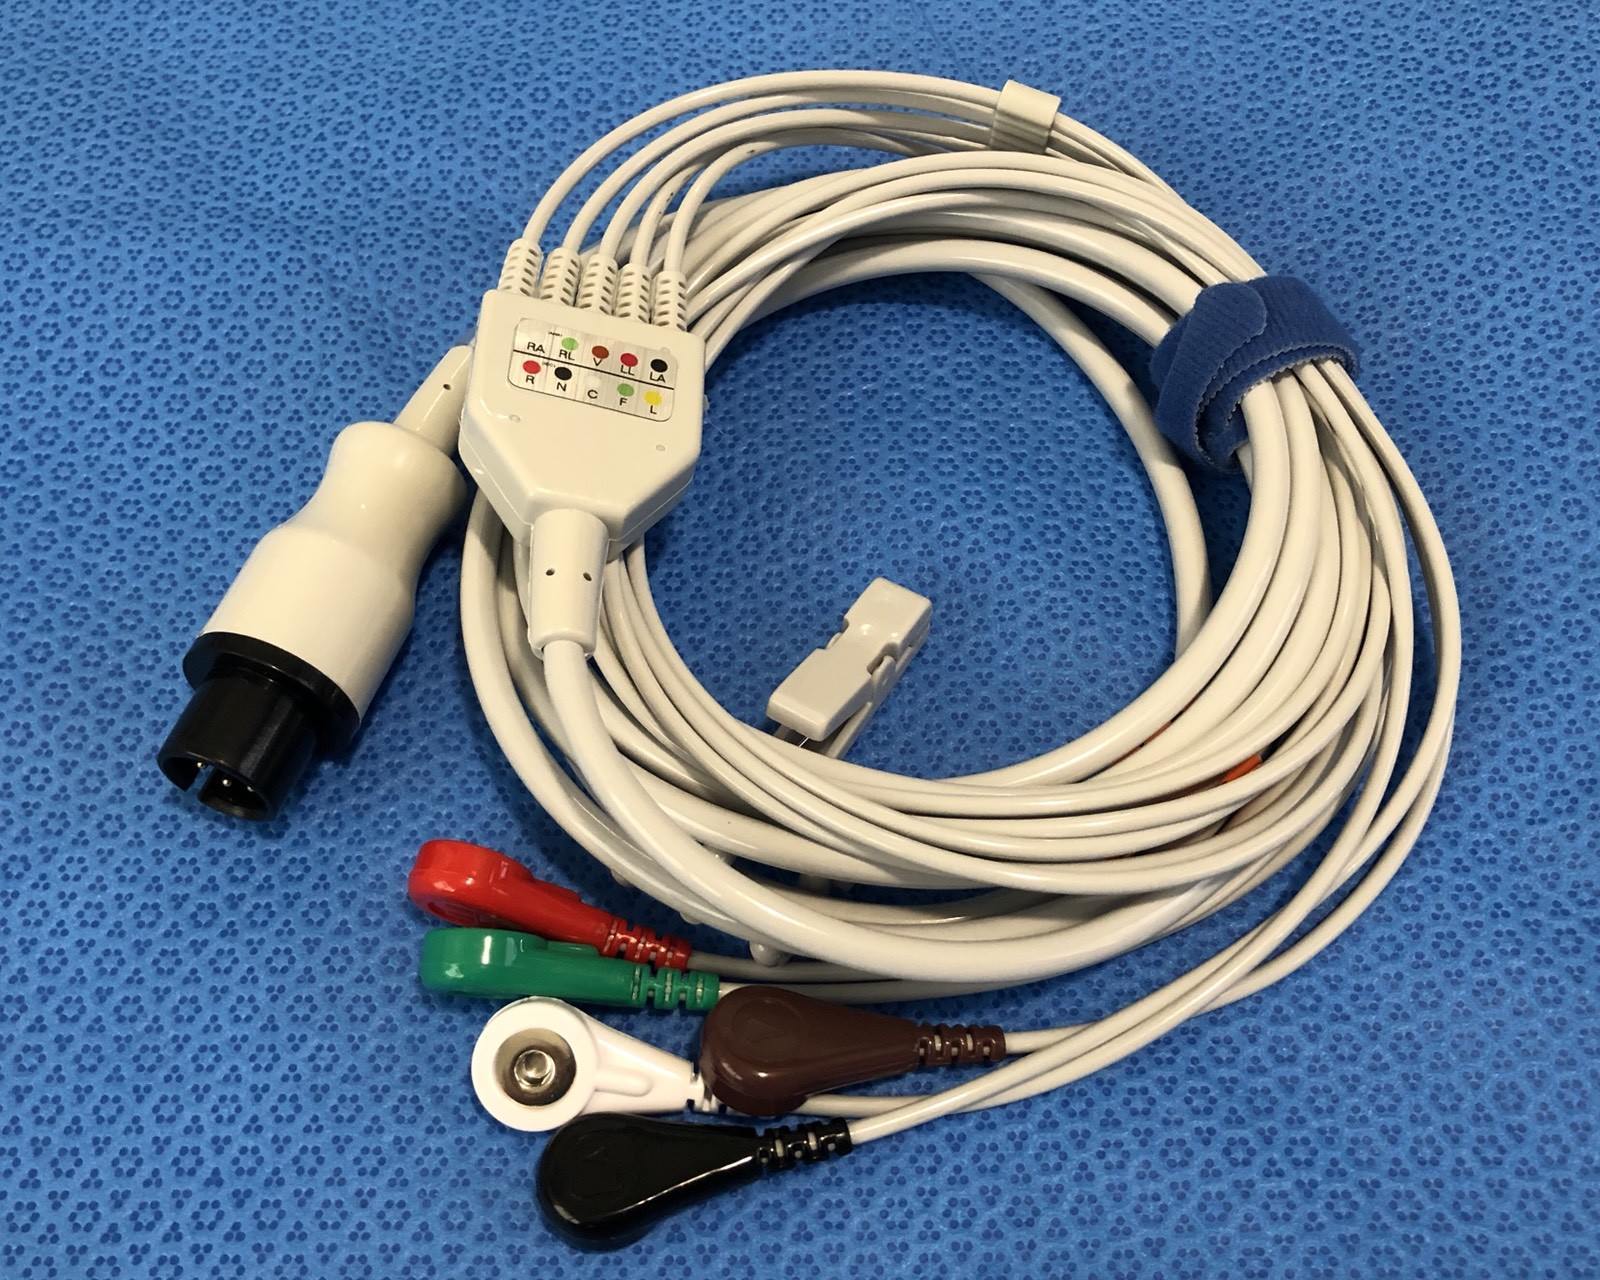 ECG EKG Cable 6 Pin 5 Leads Snap AHA - Same Day Shipping - US Located DIAGNOSTIC ULTRASOUND MACHINES FOR SALE